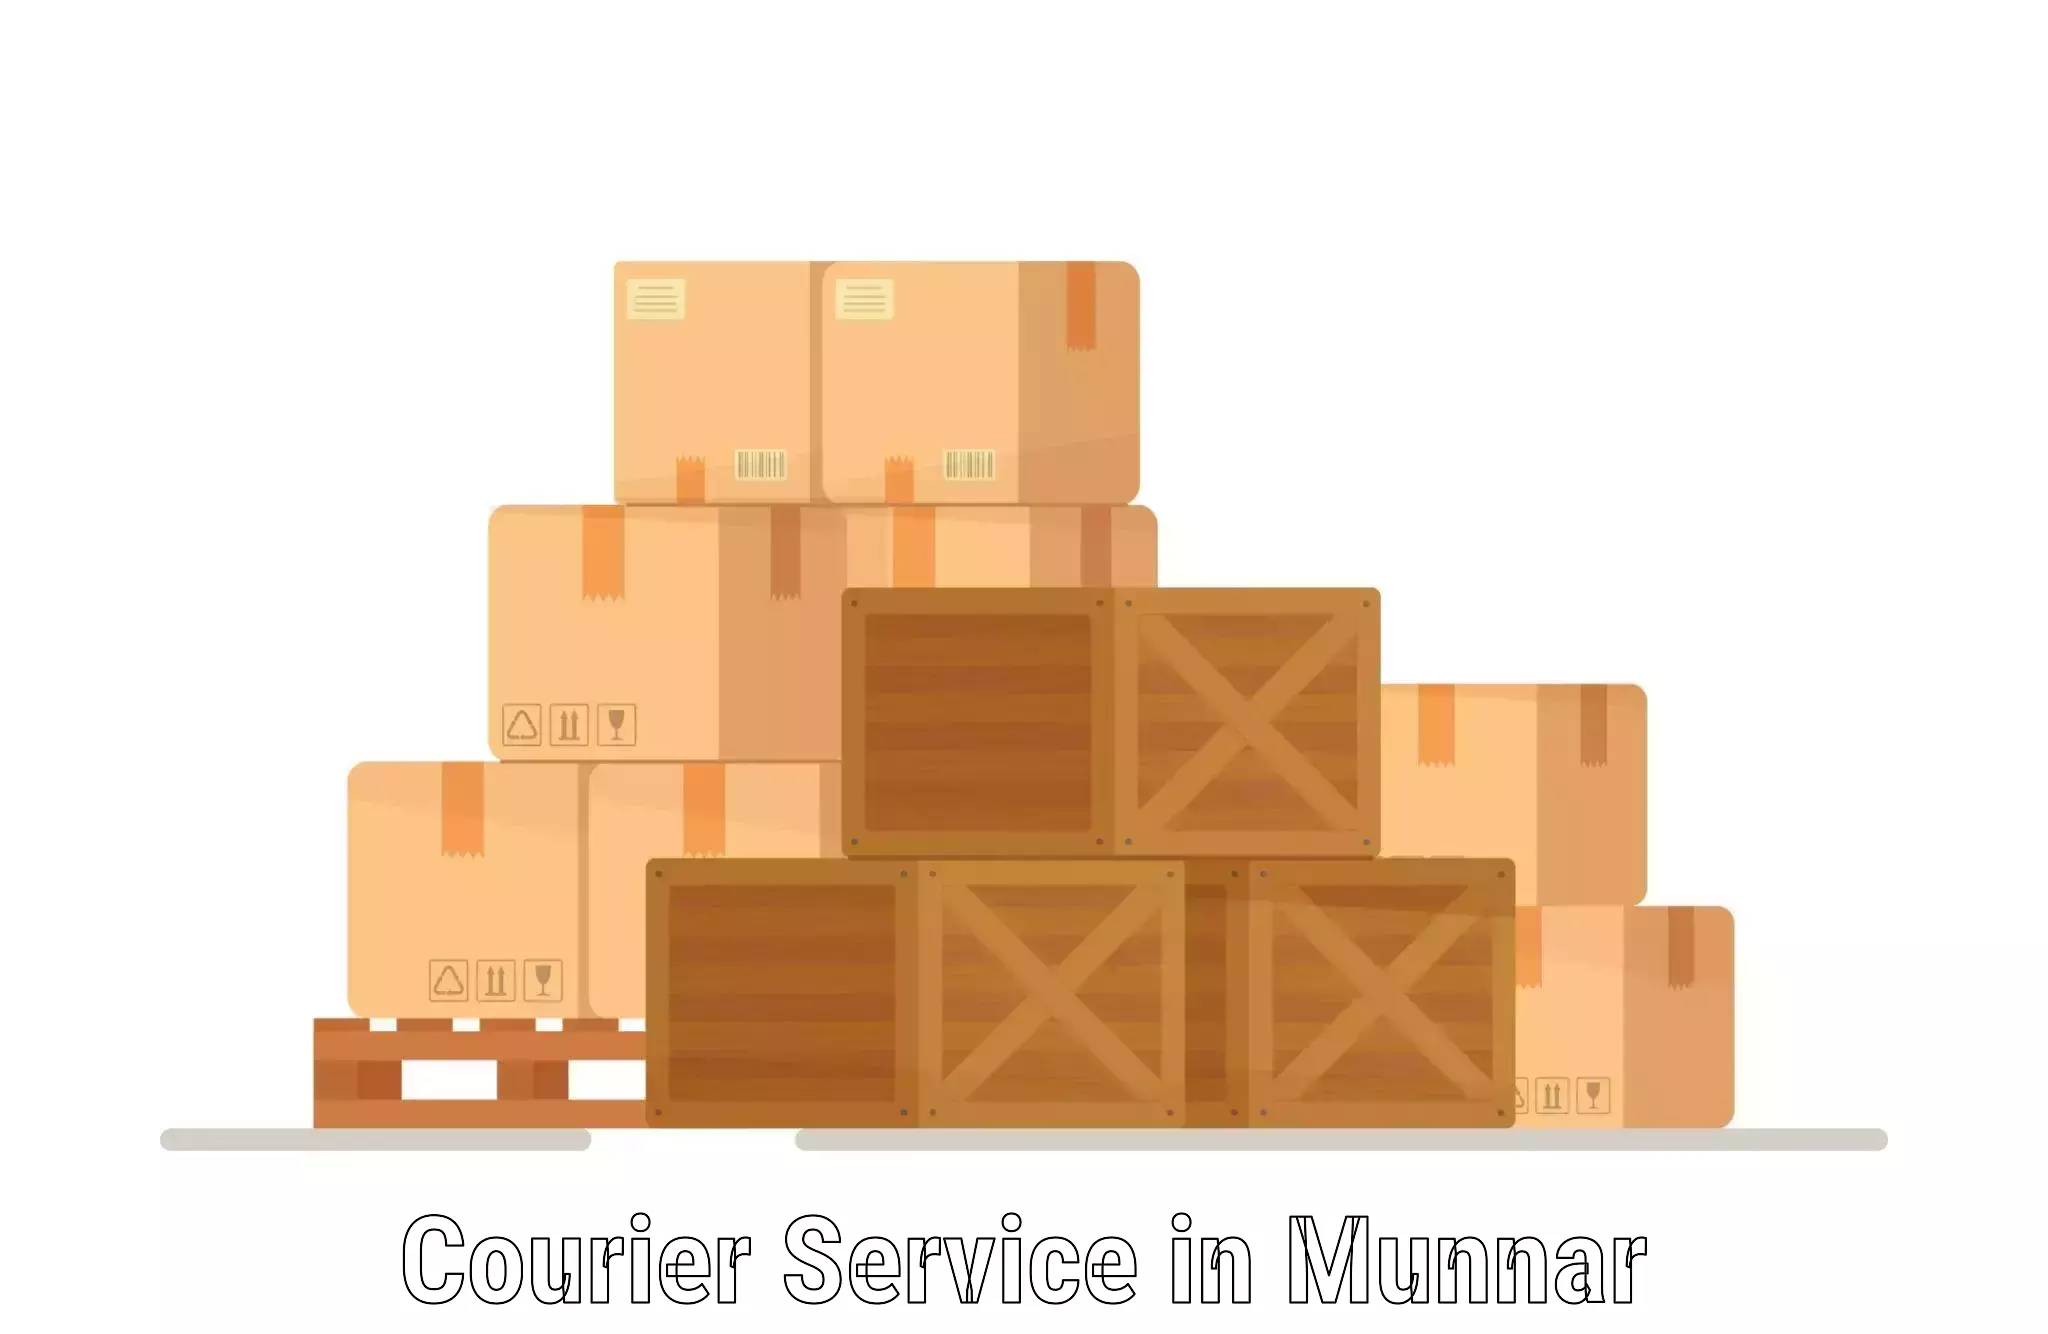 Customer-oriented courier services in Munnar